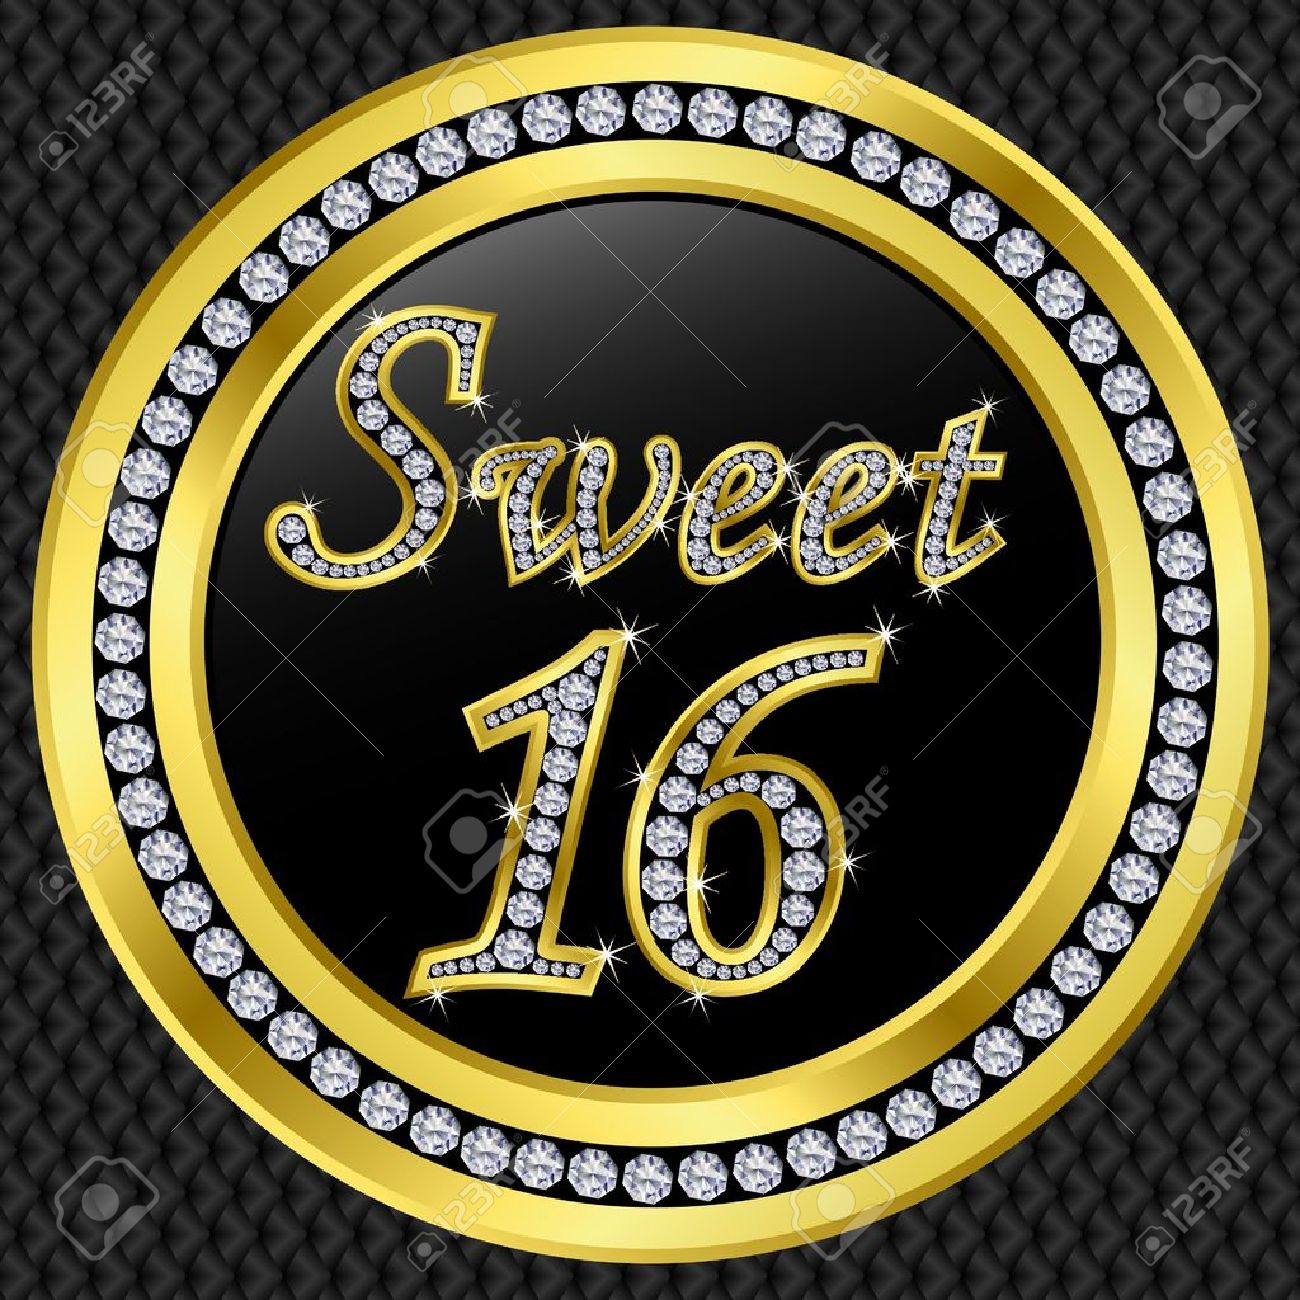 sweet sixteen clipart free - Clipground